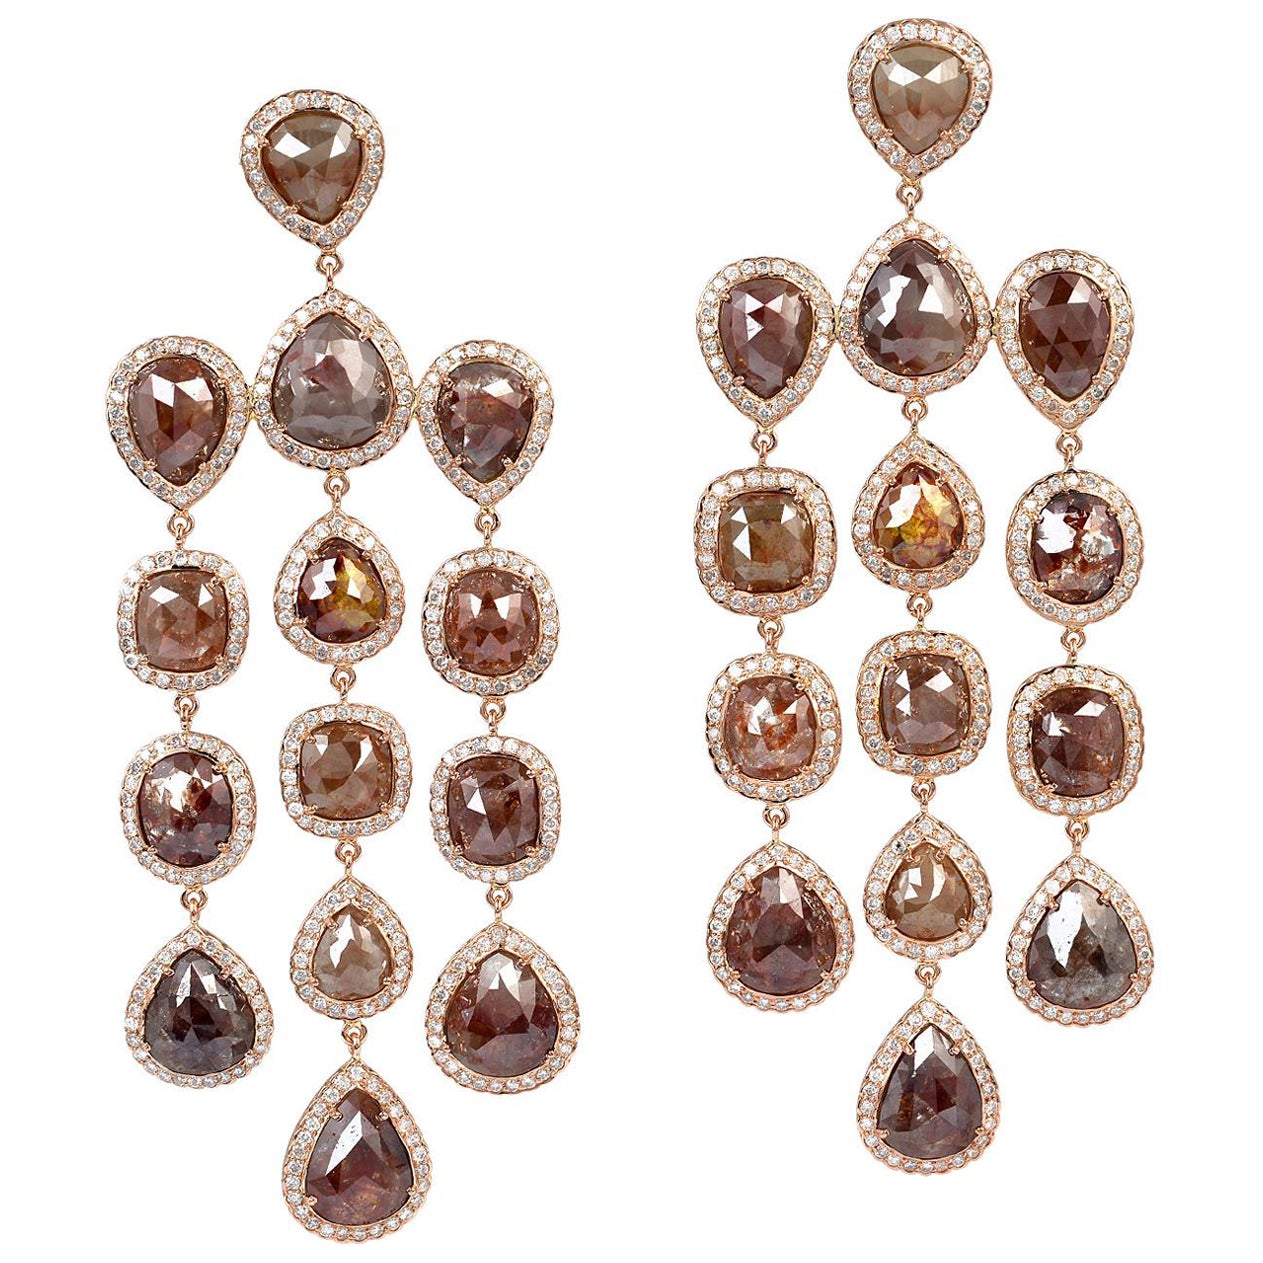 3 Layer Mix Shaped Ice Diamond Chandelier Earrings Made in 18k Rose Gold